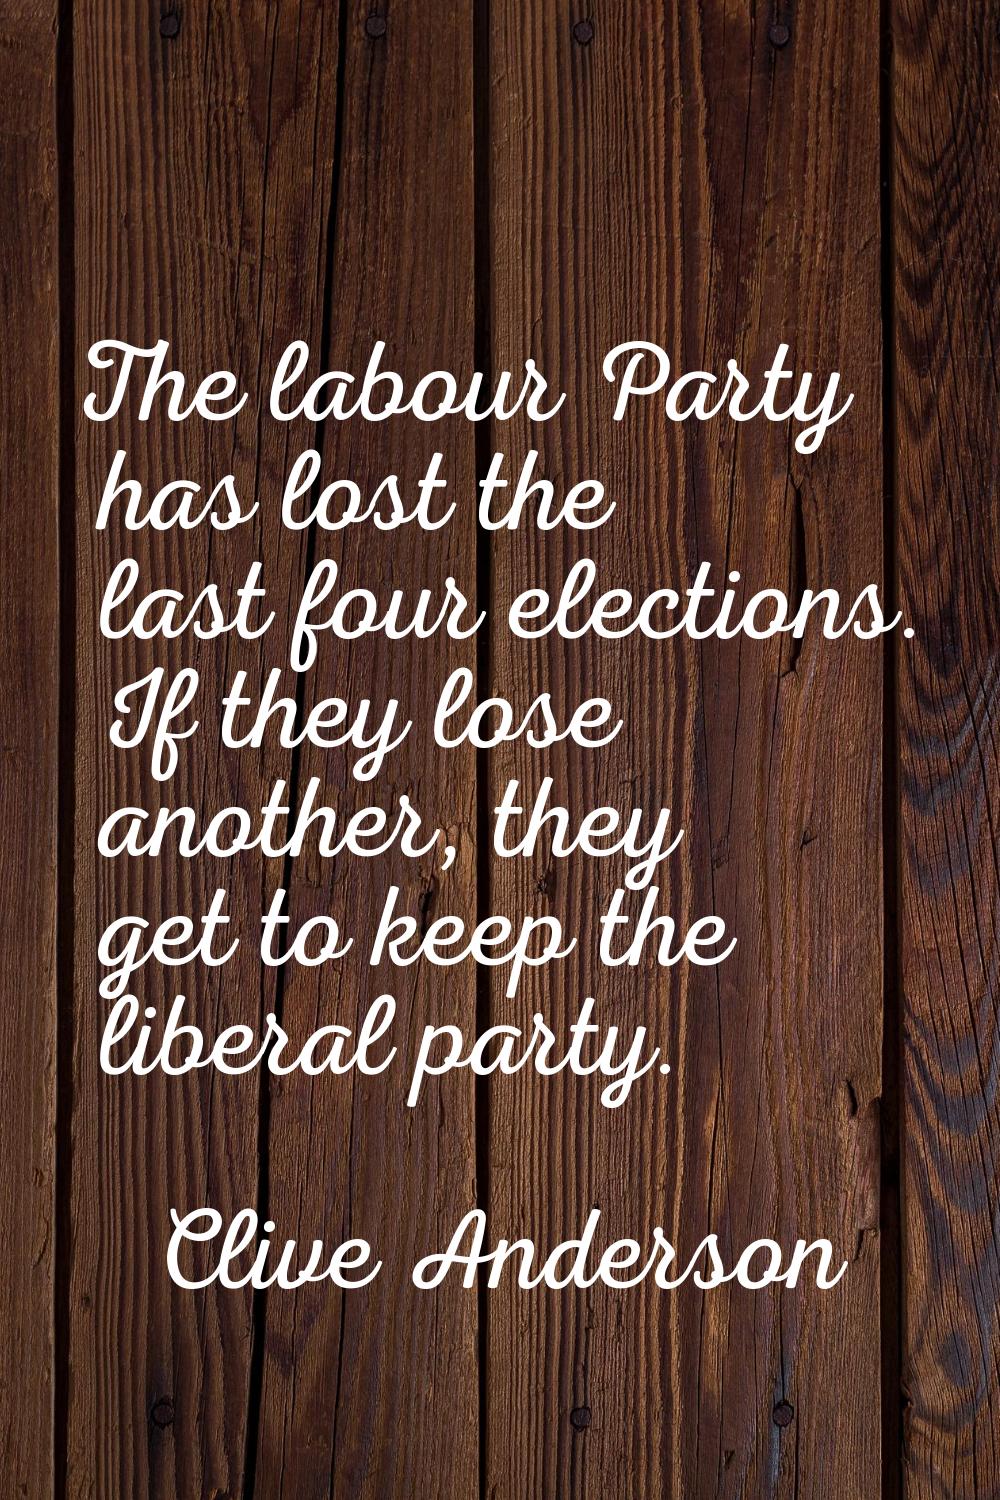 The labour Party has lost the last four elections. If they lose another, they get to keep the liber